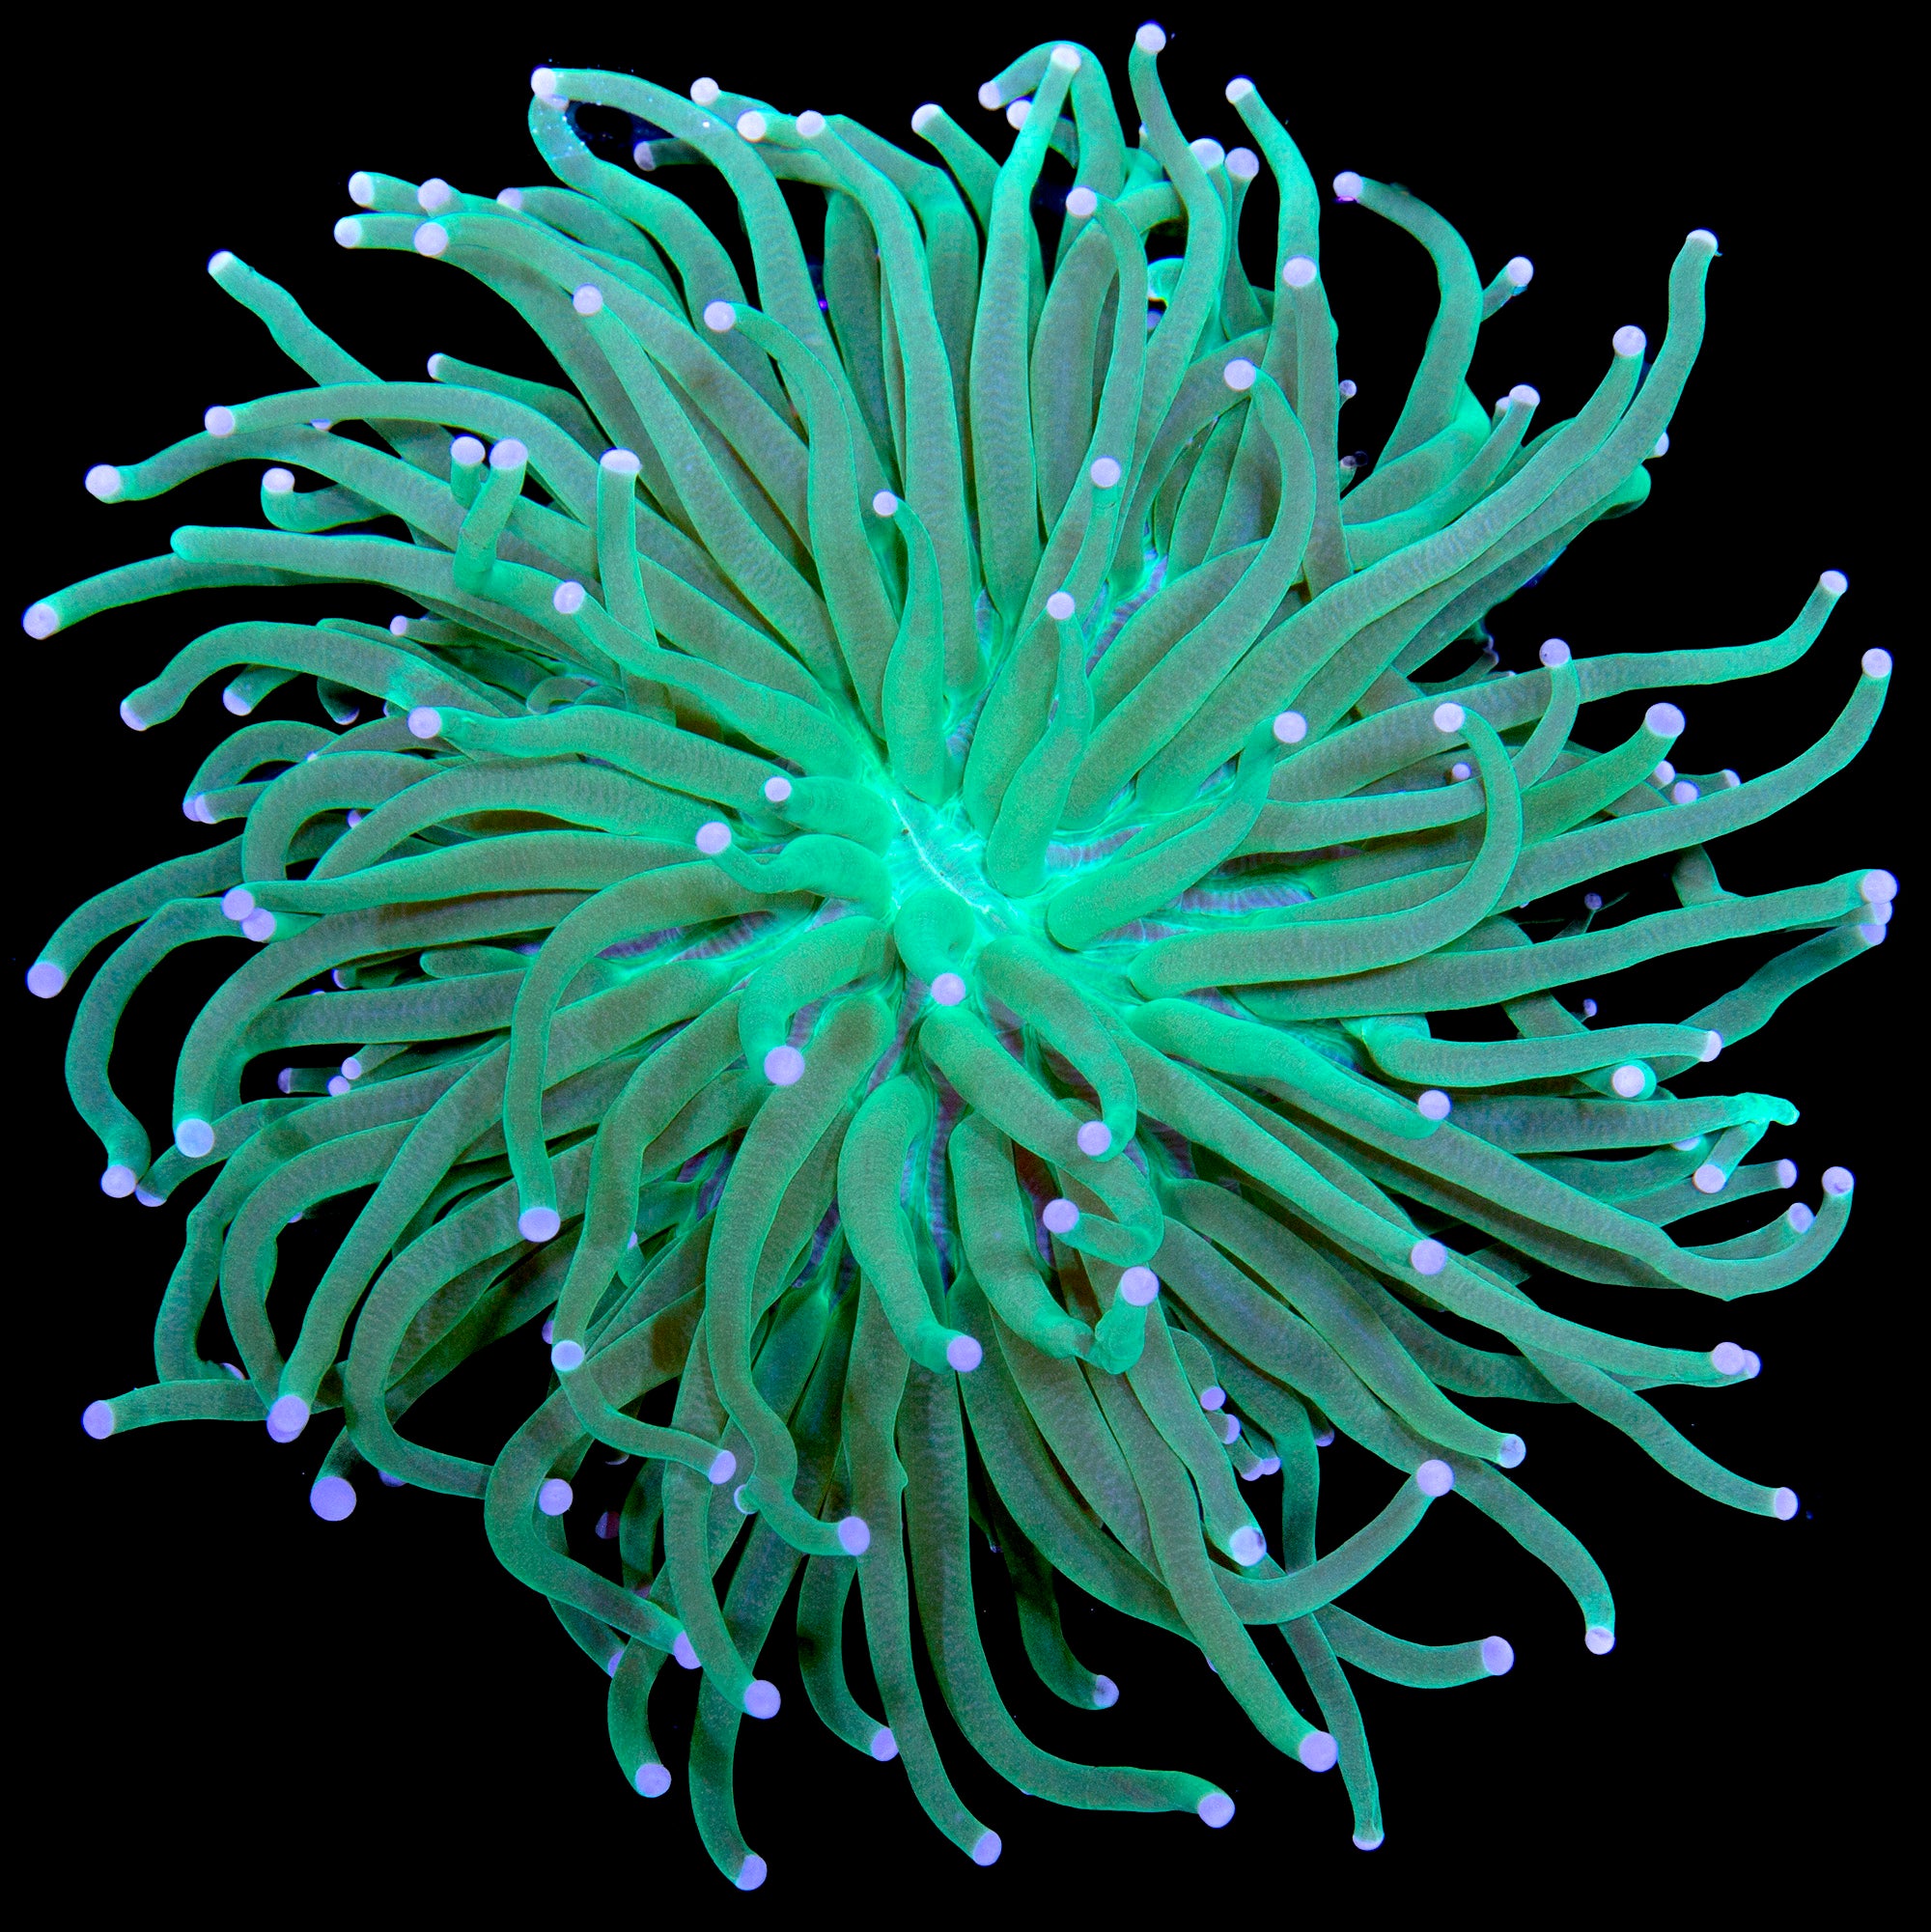 Green Long Tentacle Plate Coral